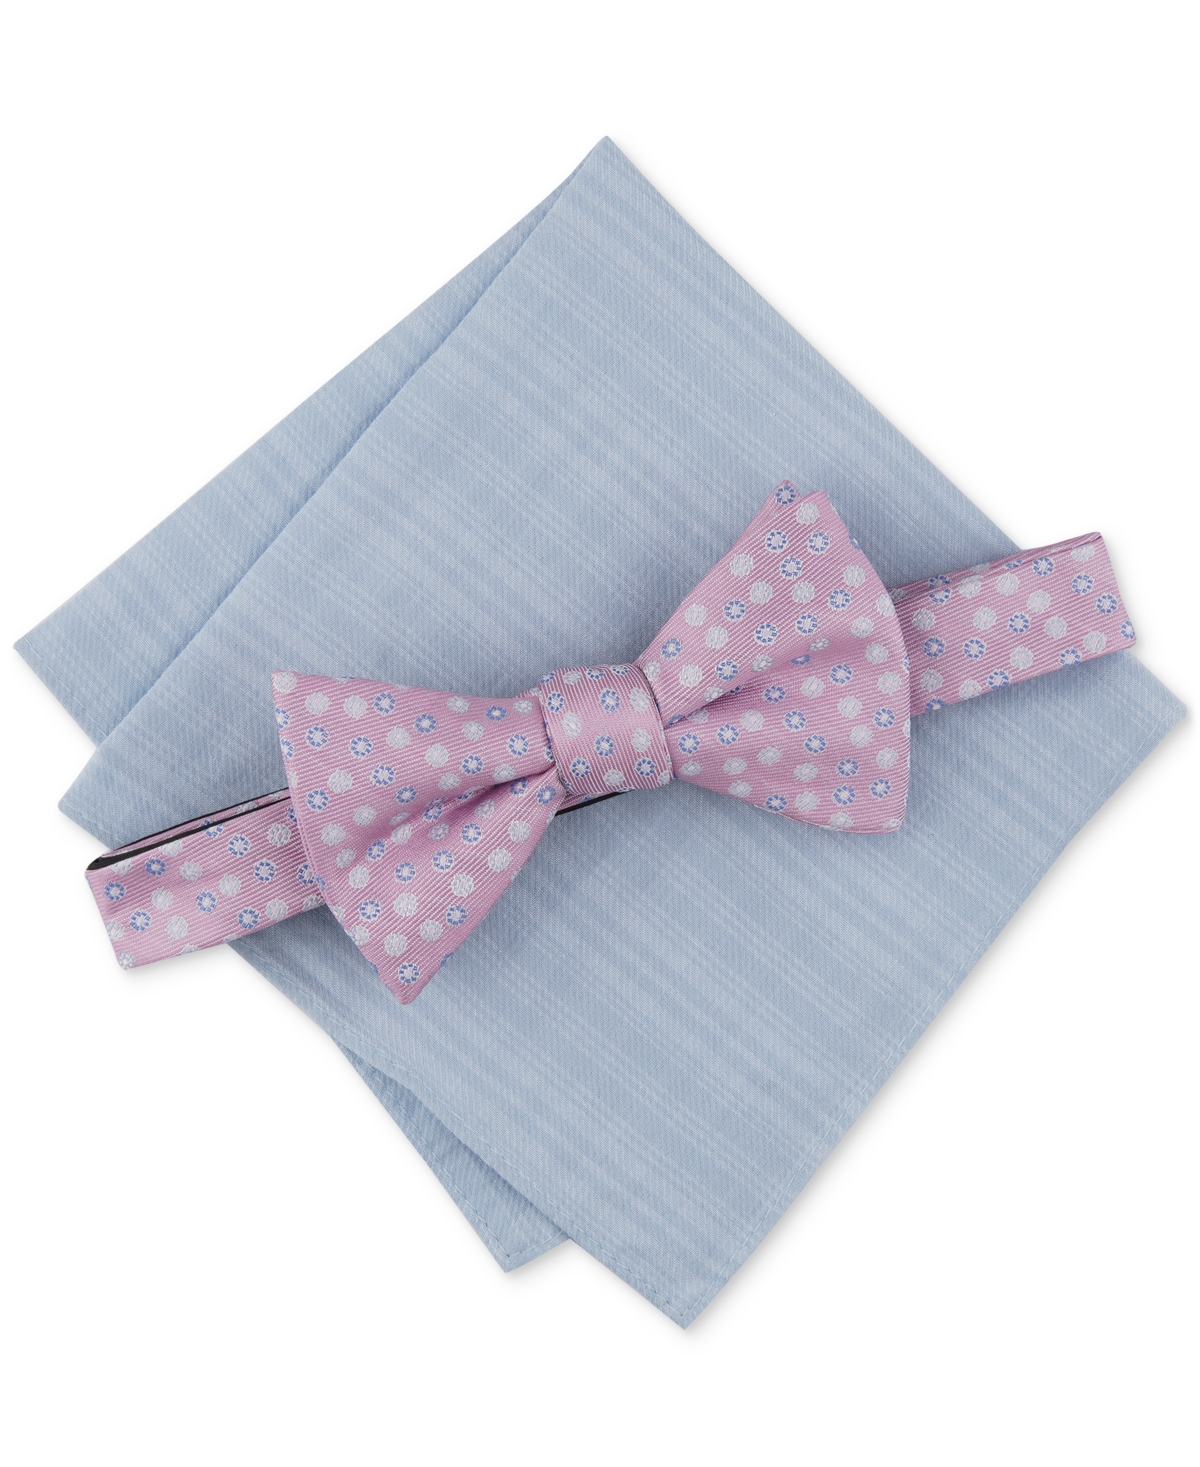 Bar Iii Men's Wolk Pre-Tied Neat Bow Tie & Solid Pocket Square Set, Created for Macy's